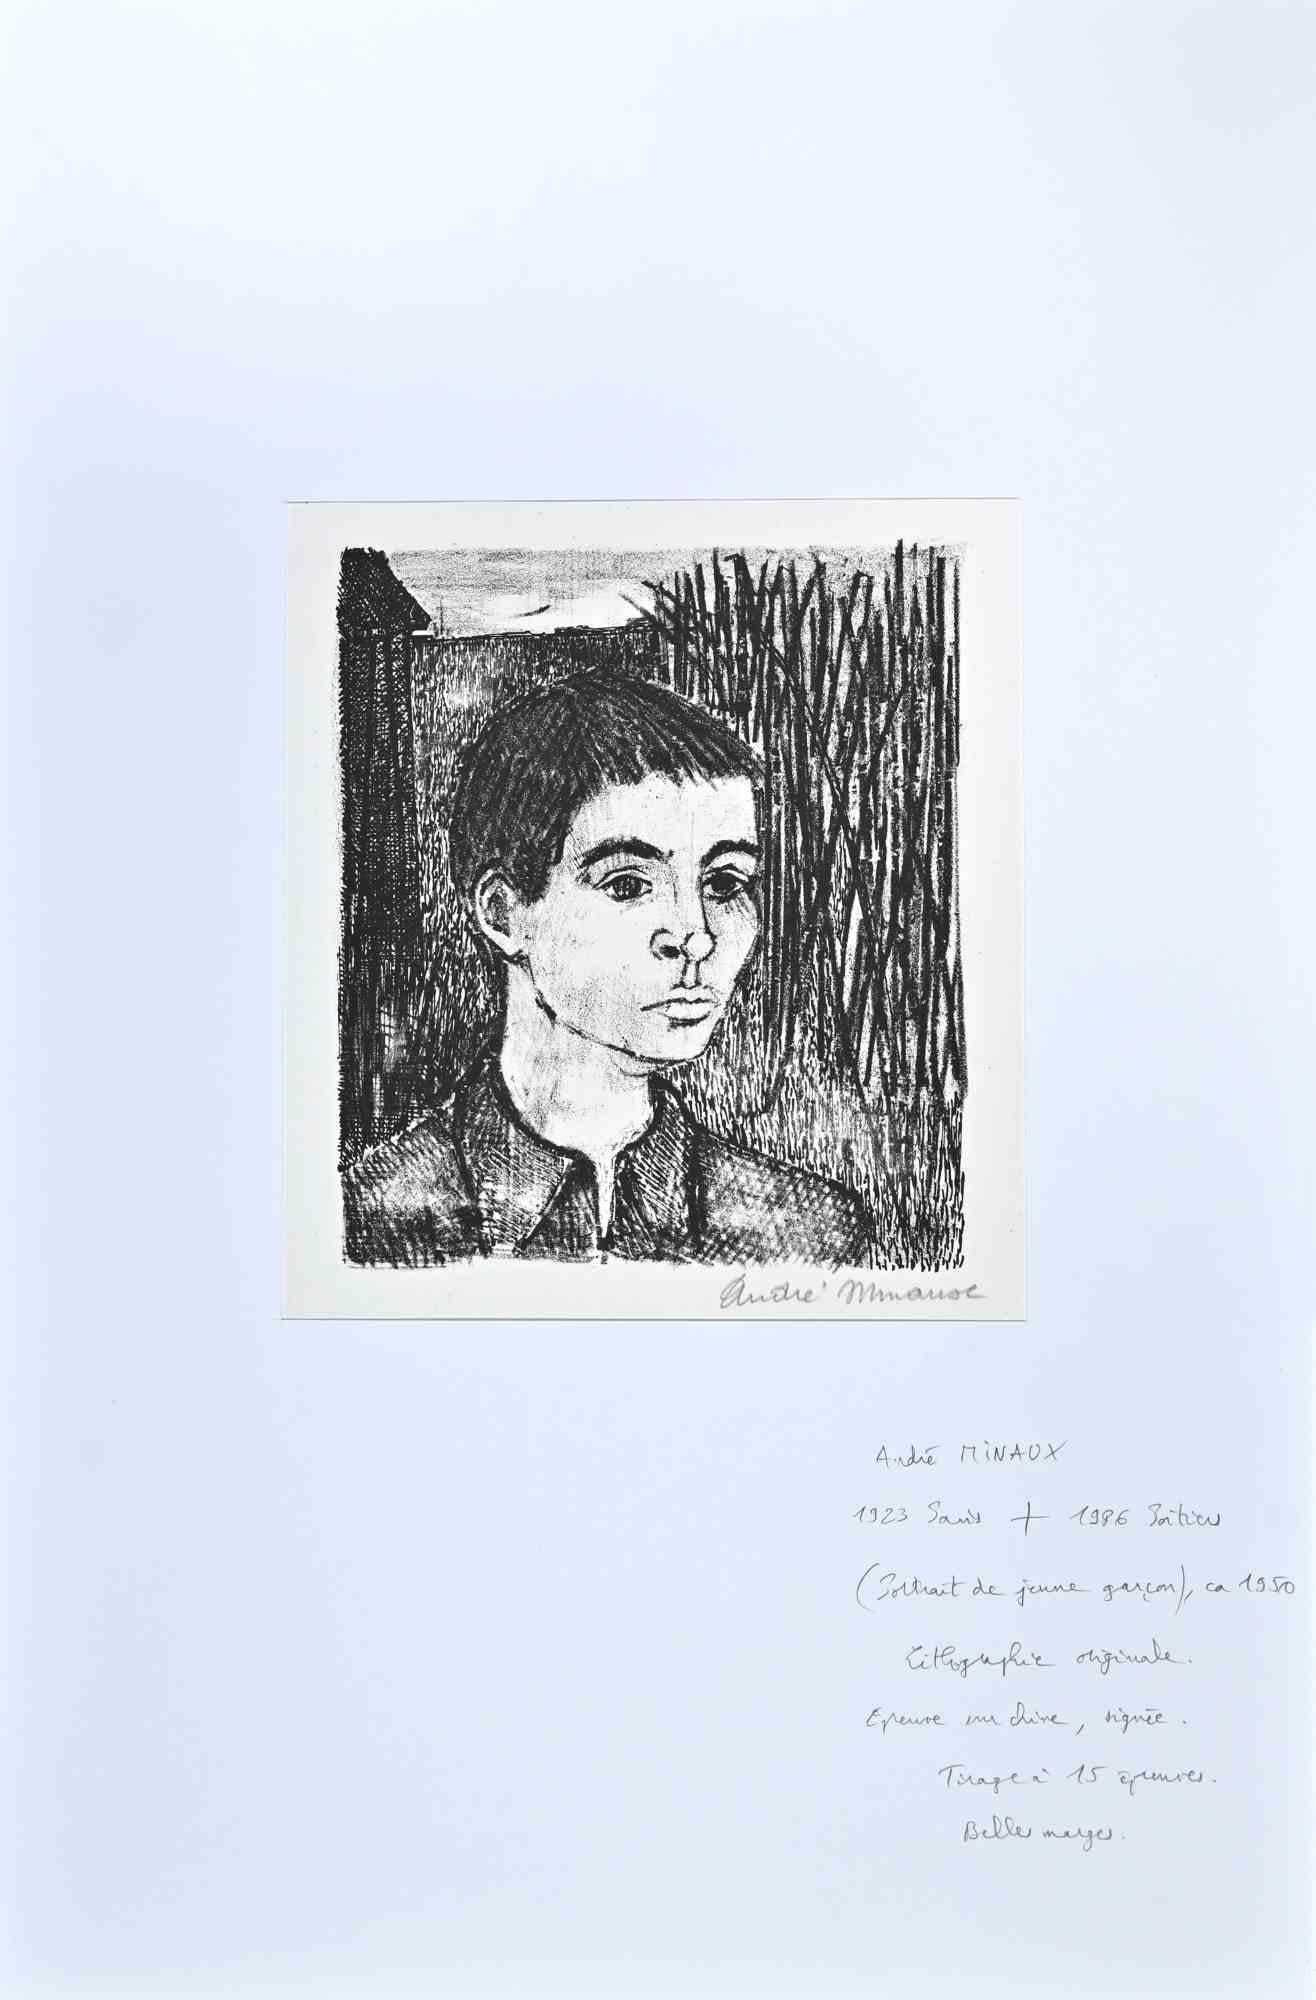 Portrait - Original Lithograph by Andre Minaux - mid-20th Century - Print by André Minaux